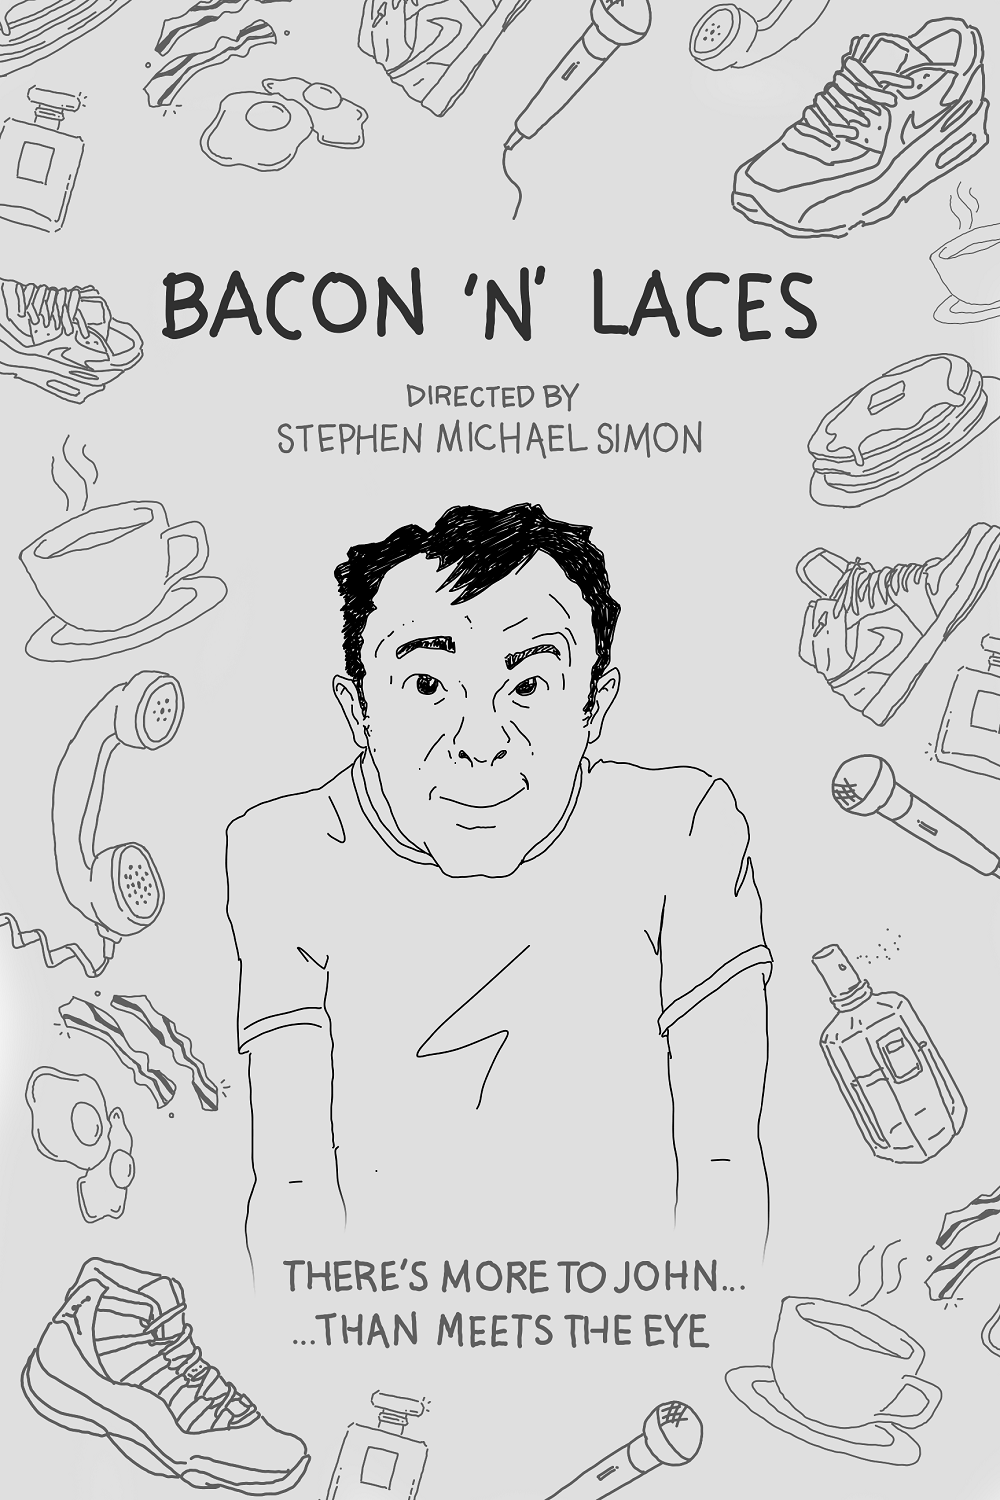 BACON 'N' LACES